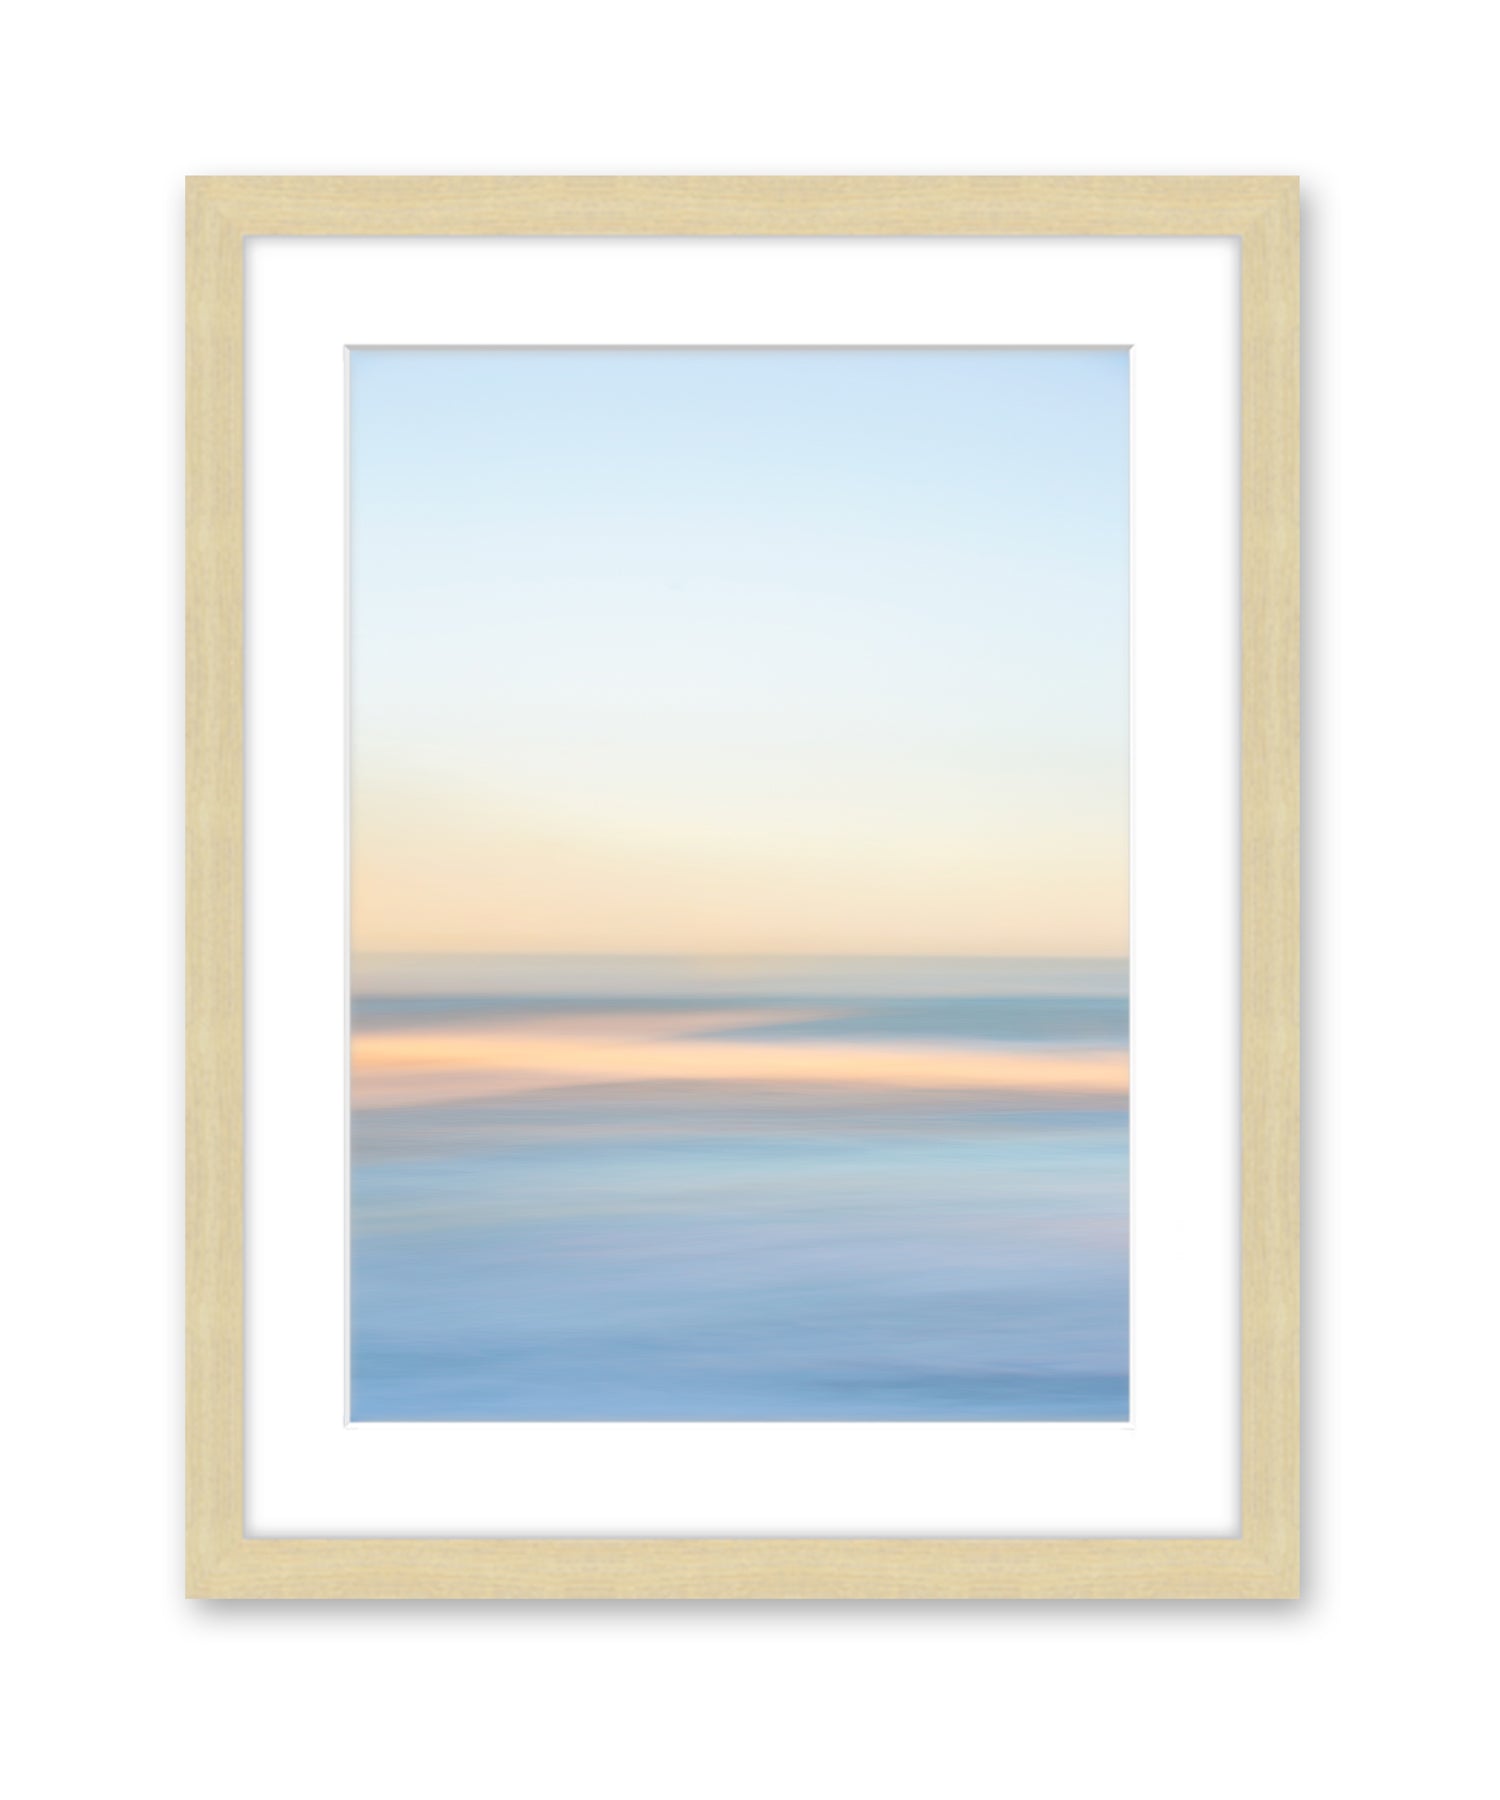 Abstract Minimal Print, Blue Yellow Beach Photograph, Natural Wood Frame, Wright and Roam